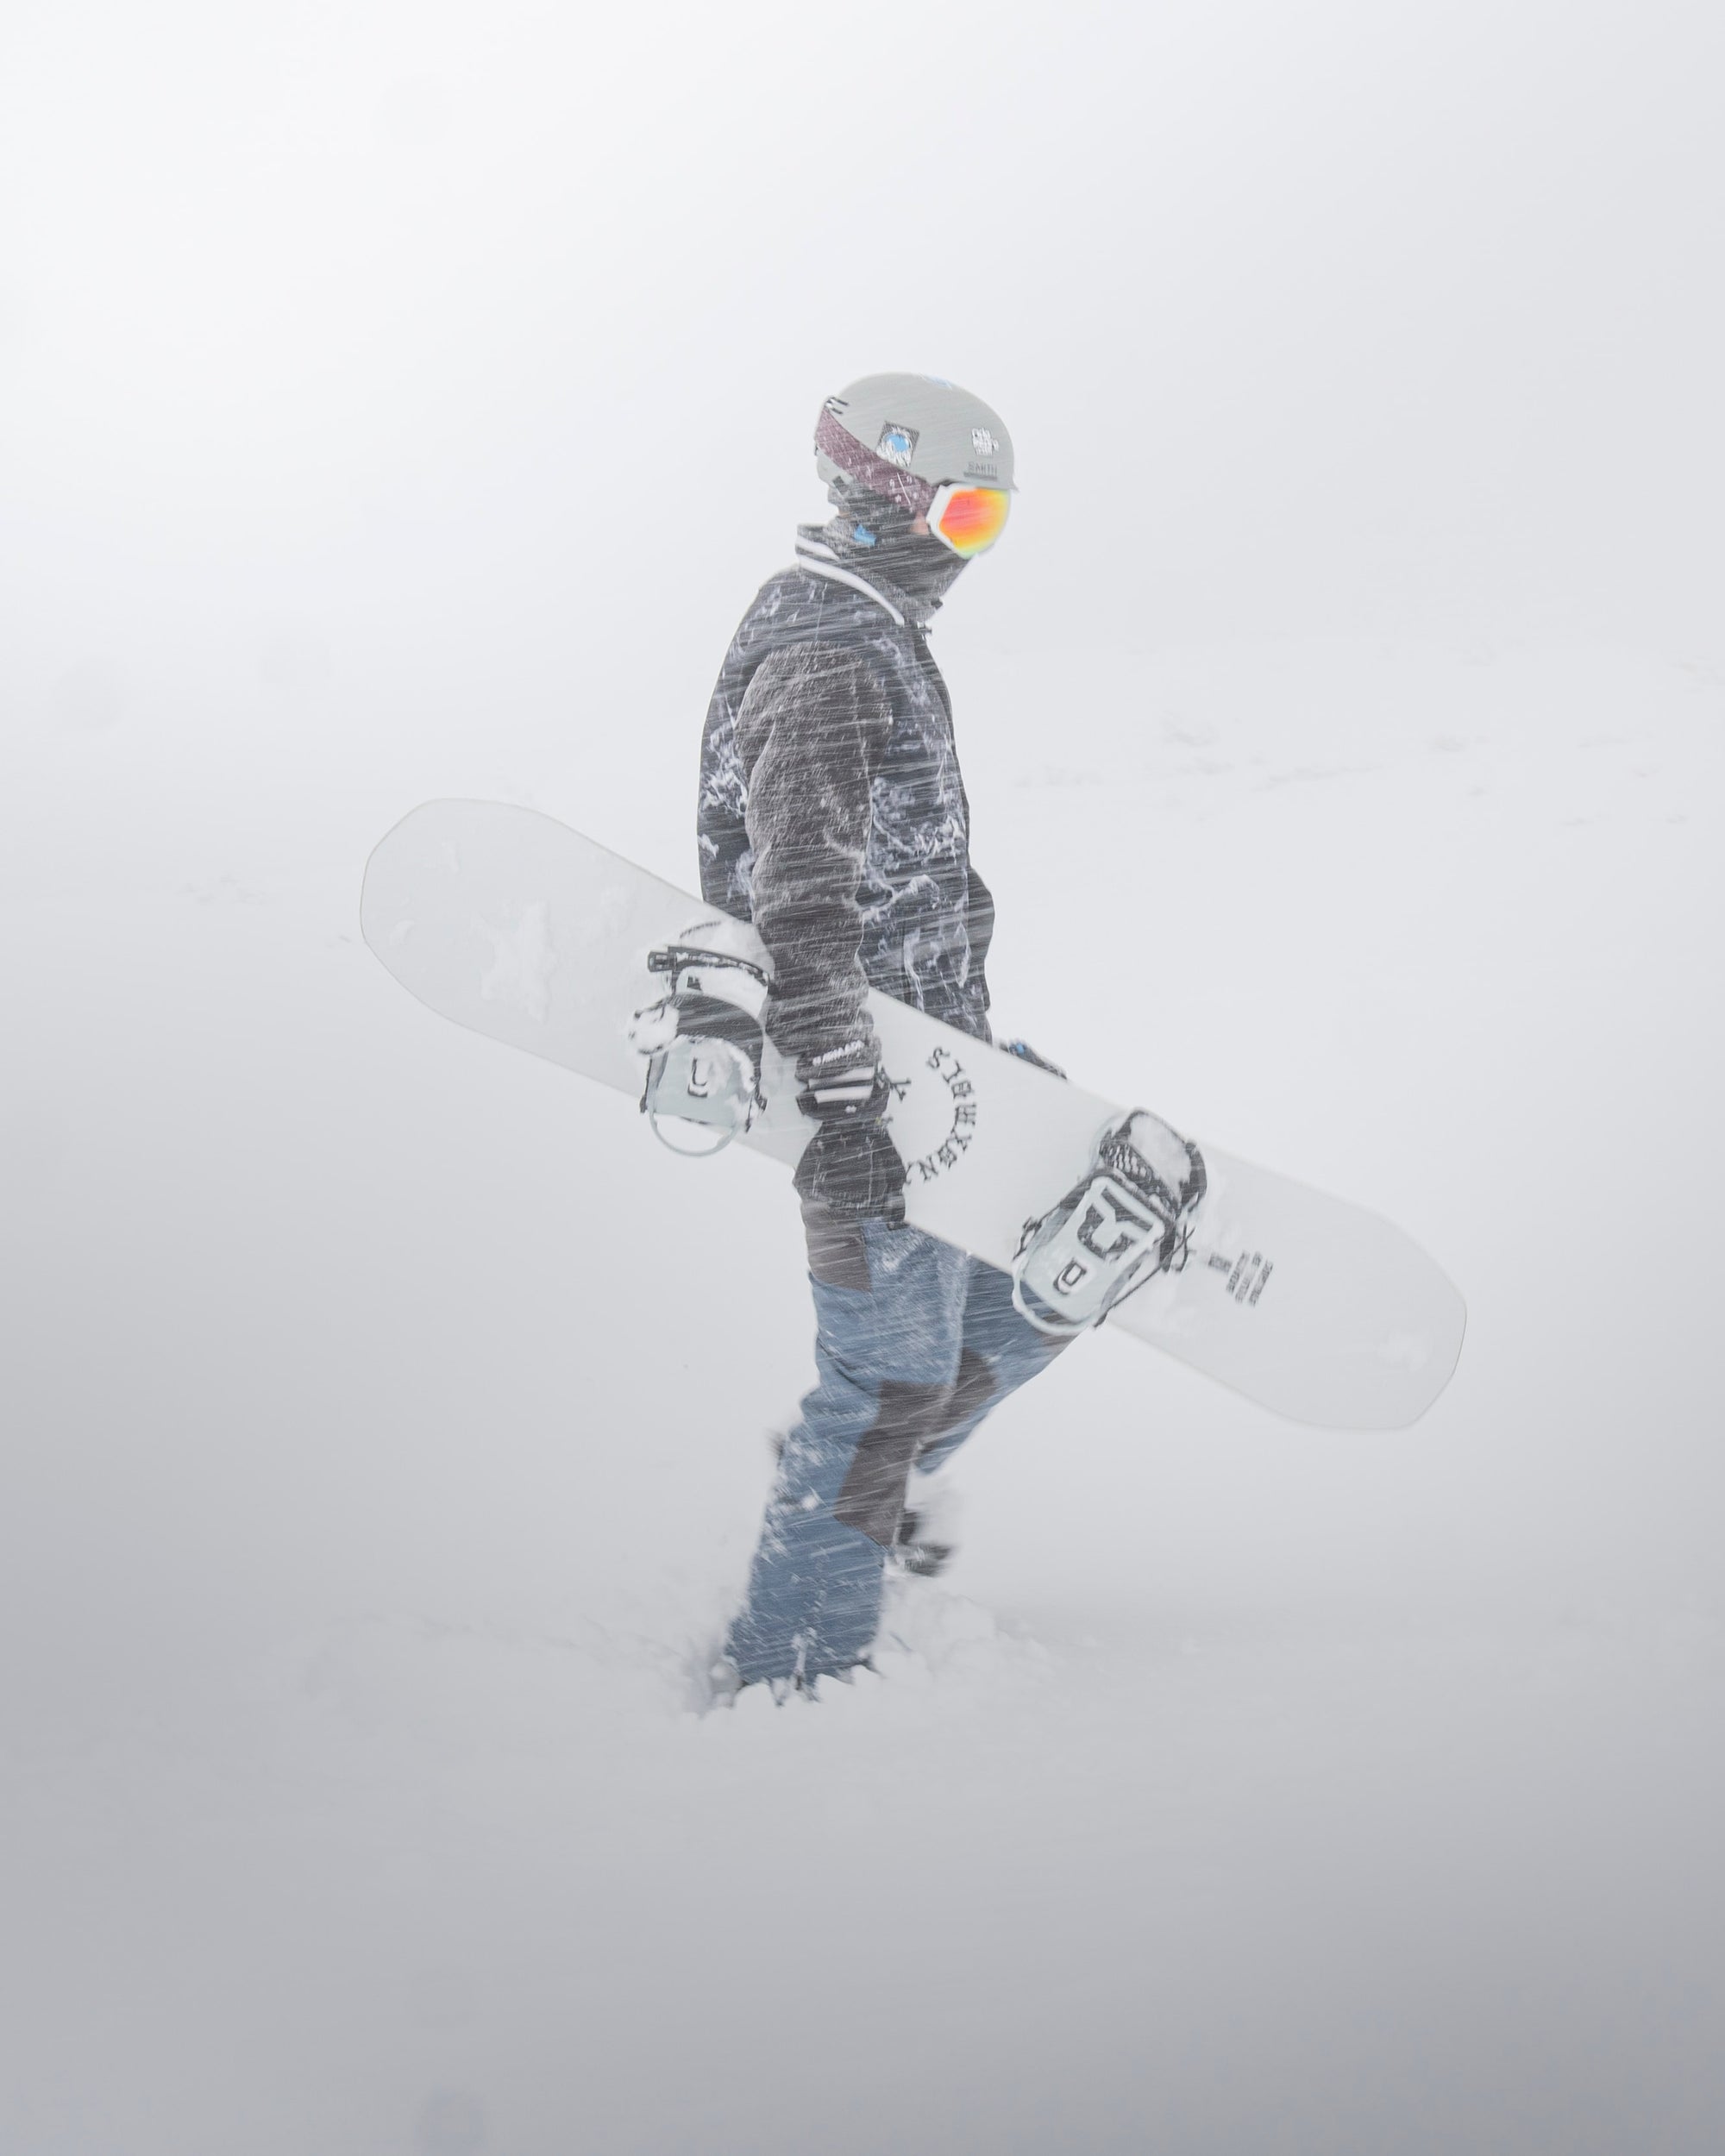 How To Snowboard [A Rad Guide]